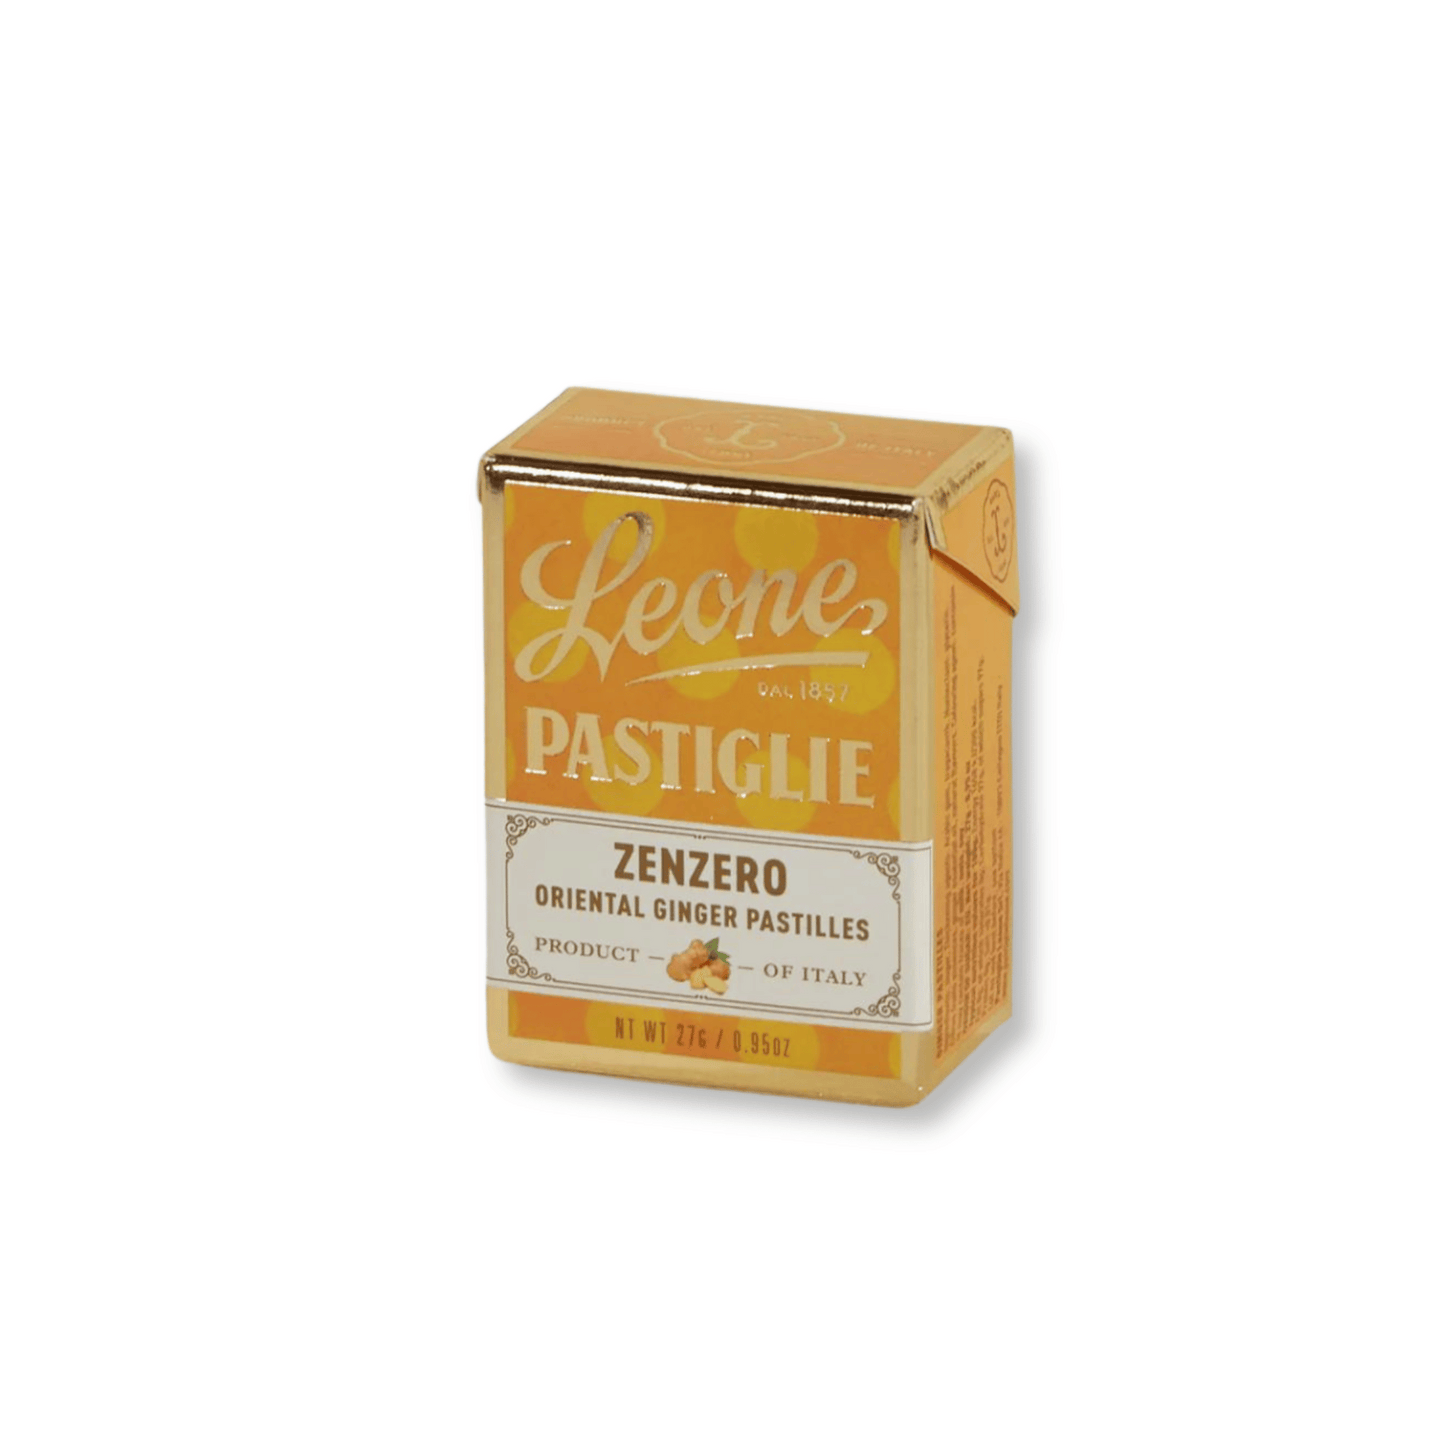 Primary Image of Ginger Pastilles